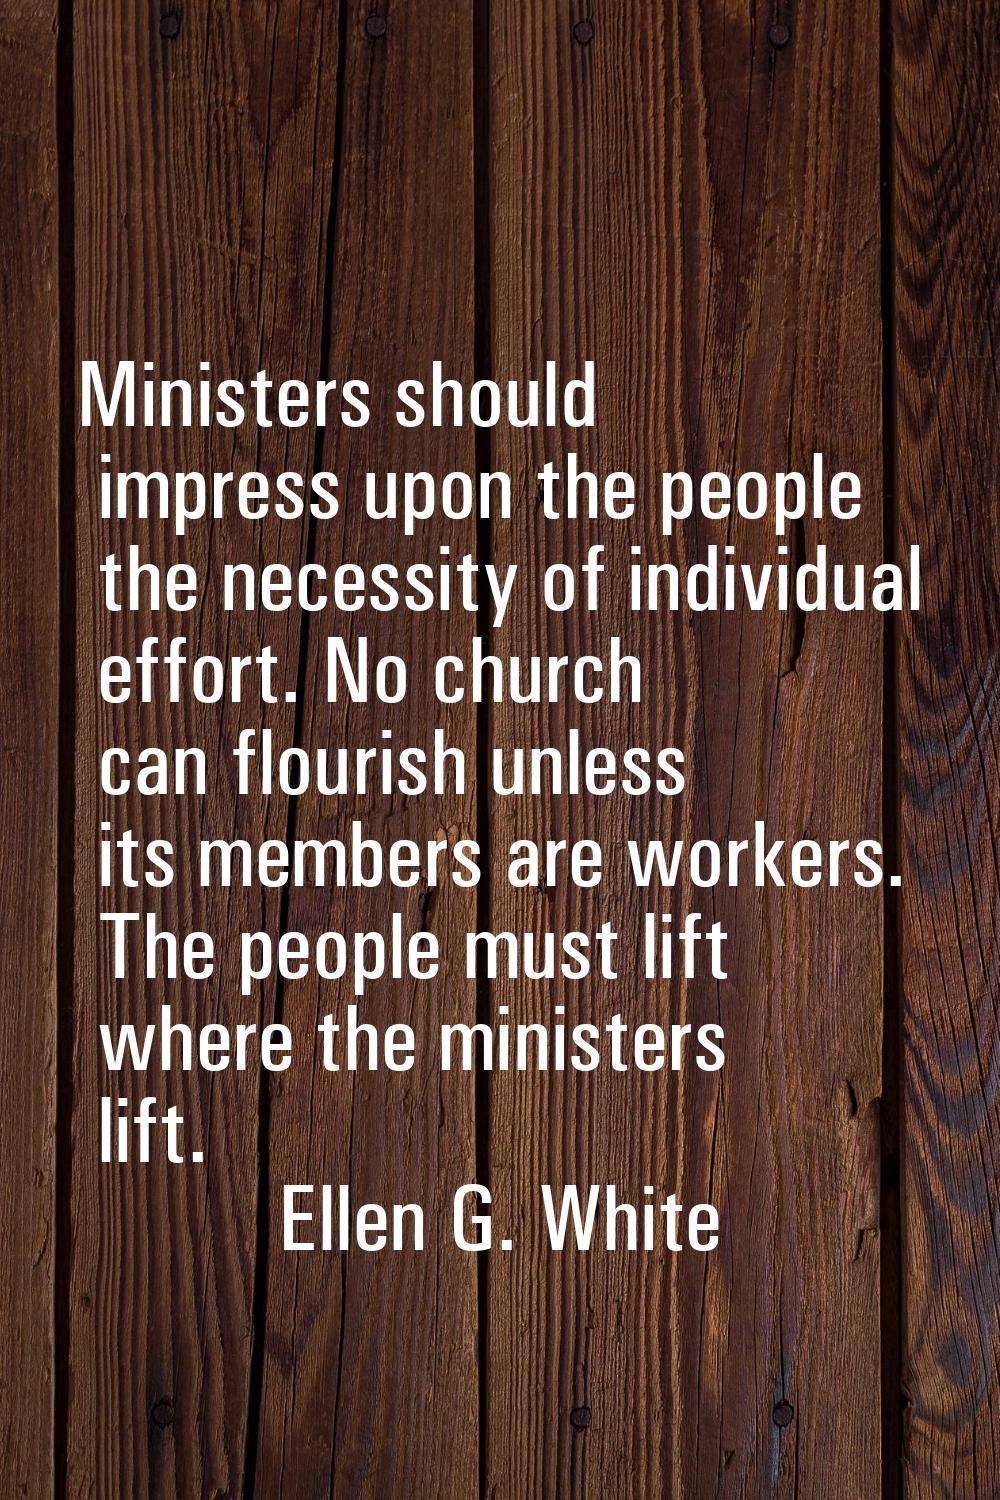 Ministers should impress upon the people the necessity of individual effort. No church can flourish